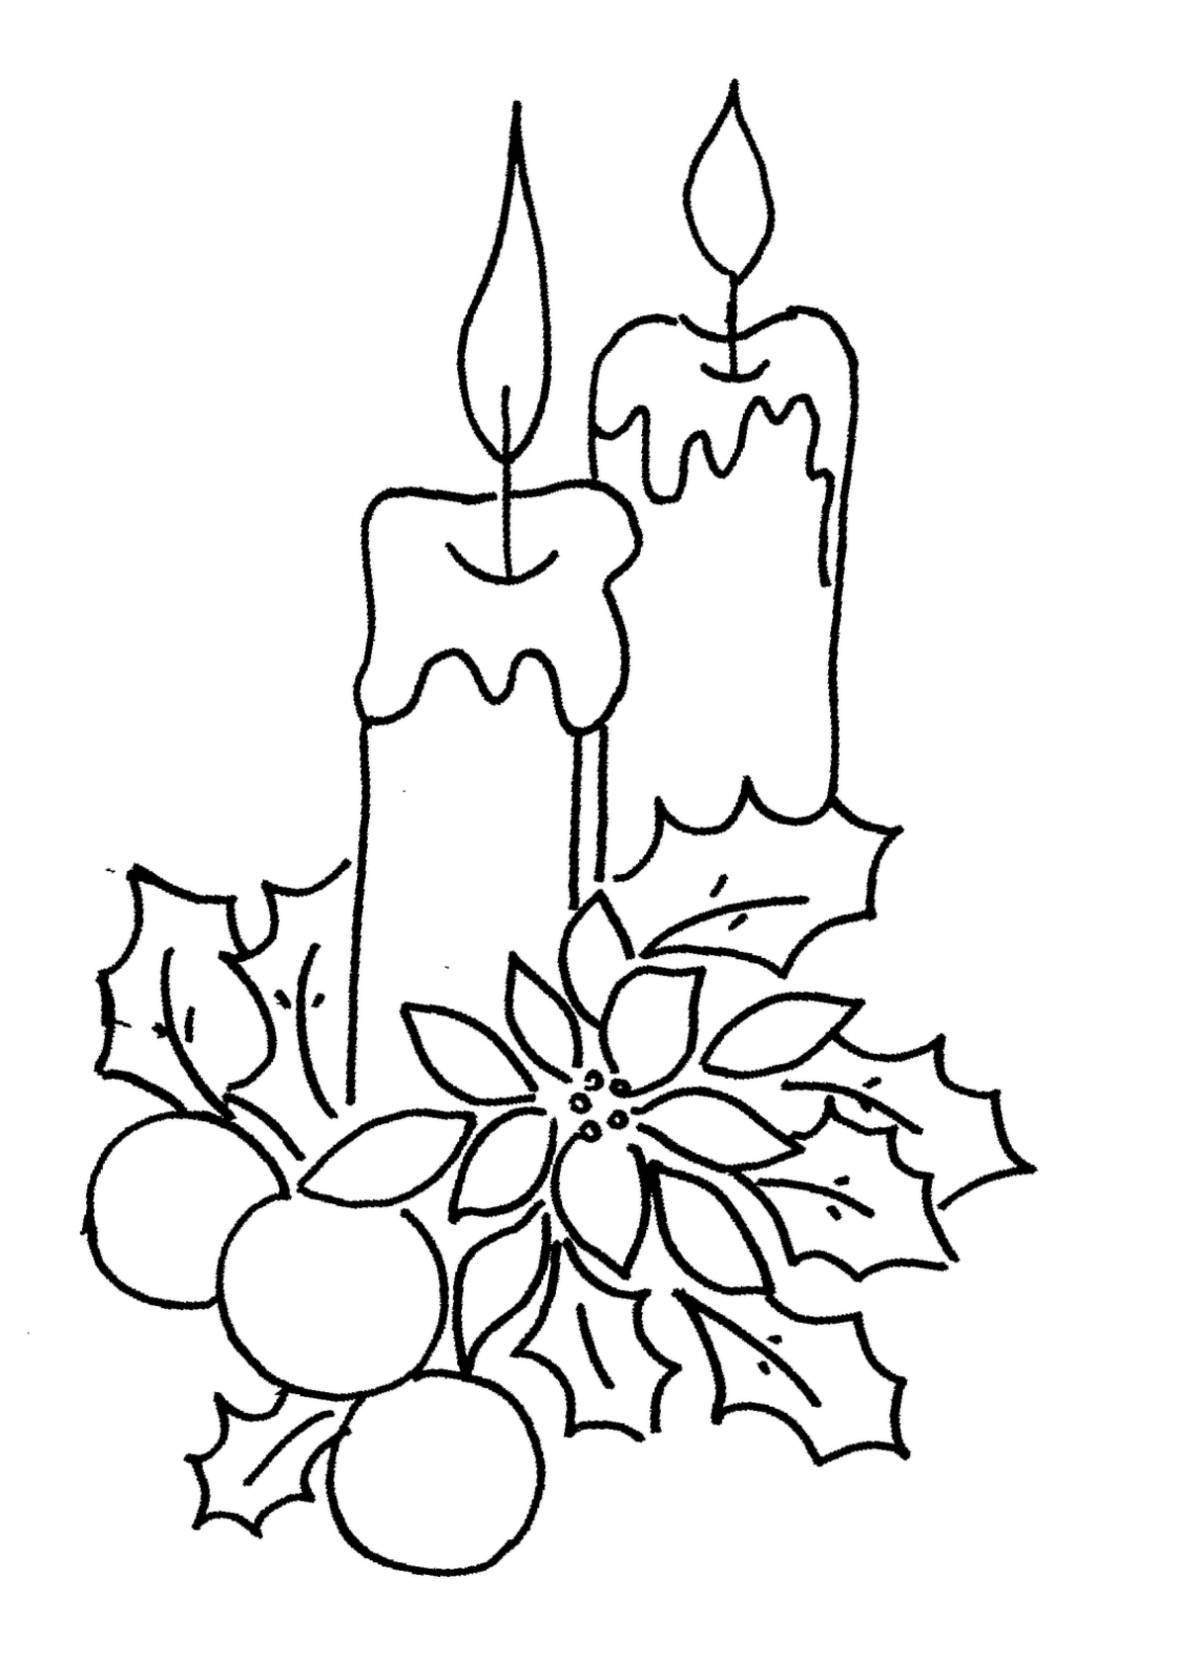 Great Christmas candle coloring page